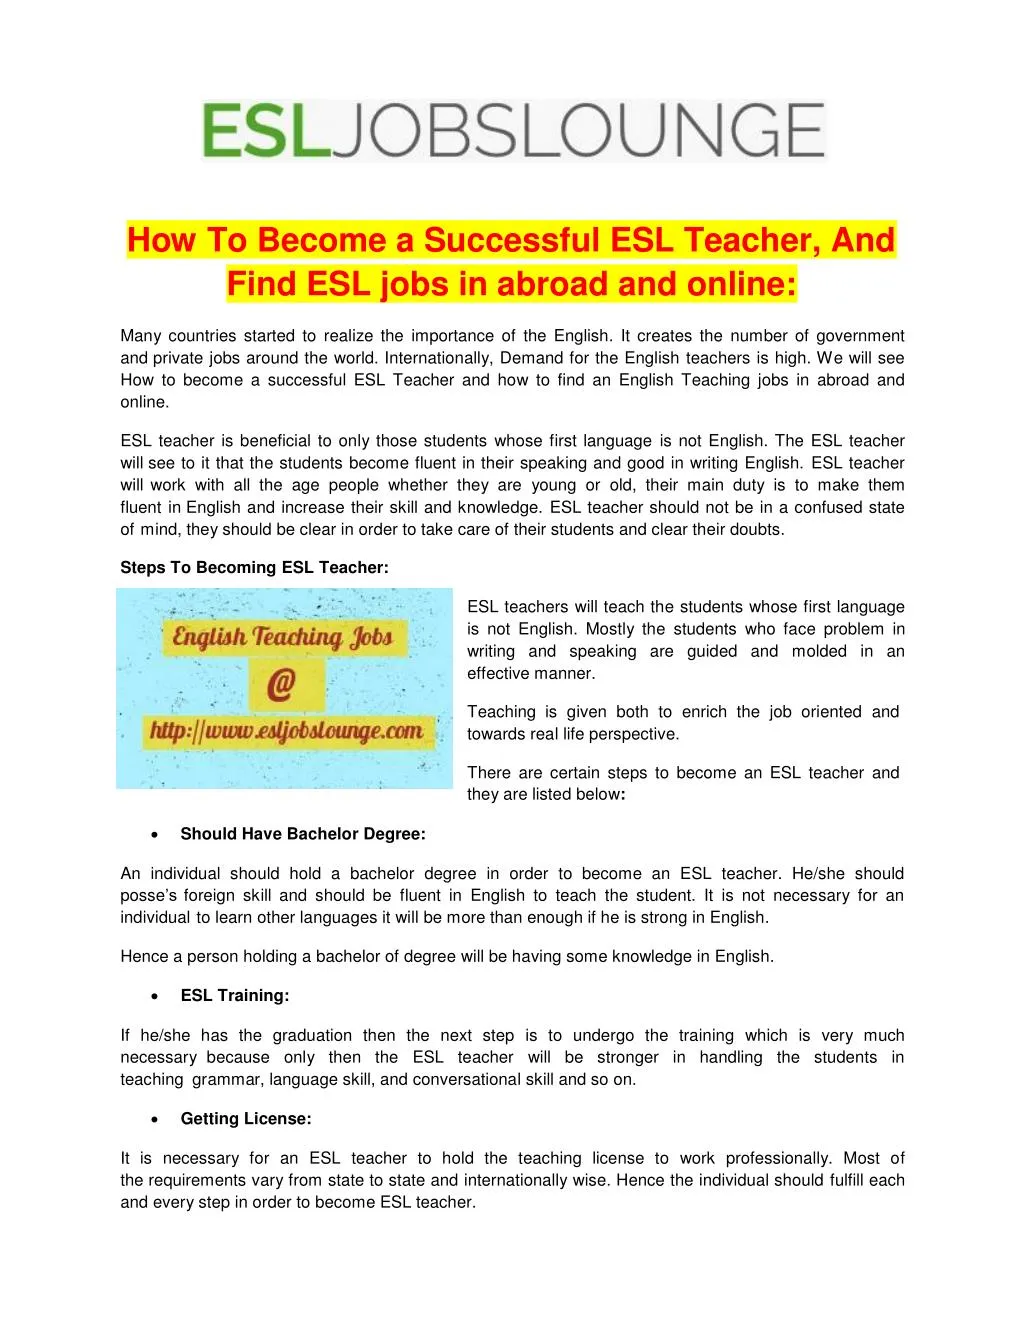 how to become a successful esl teacher and find